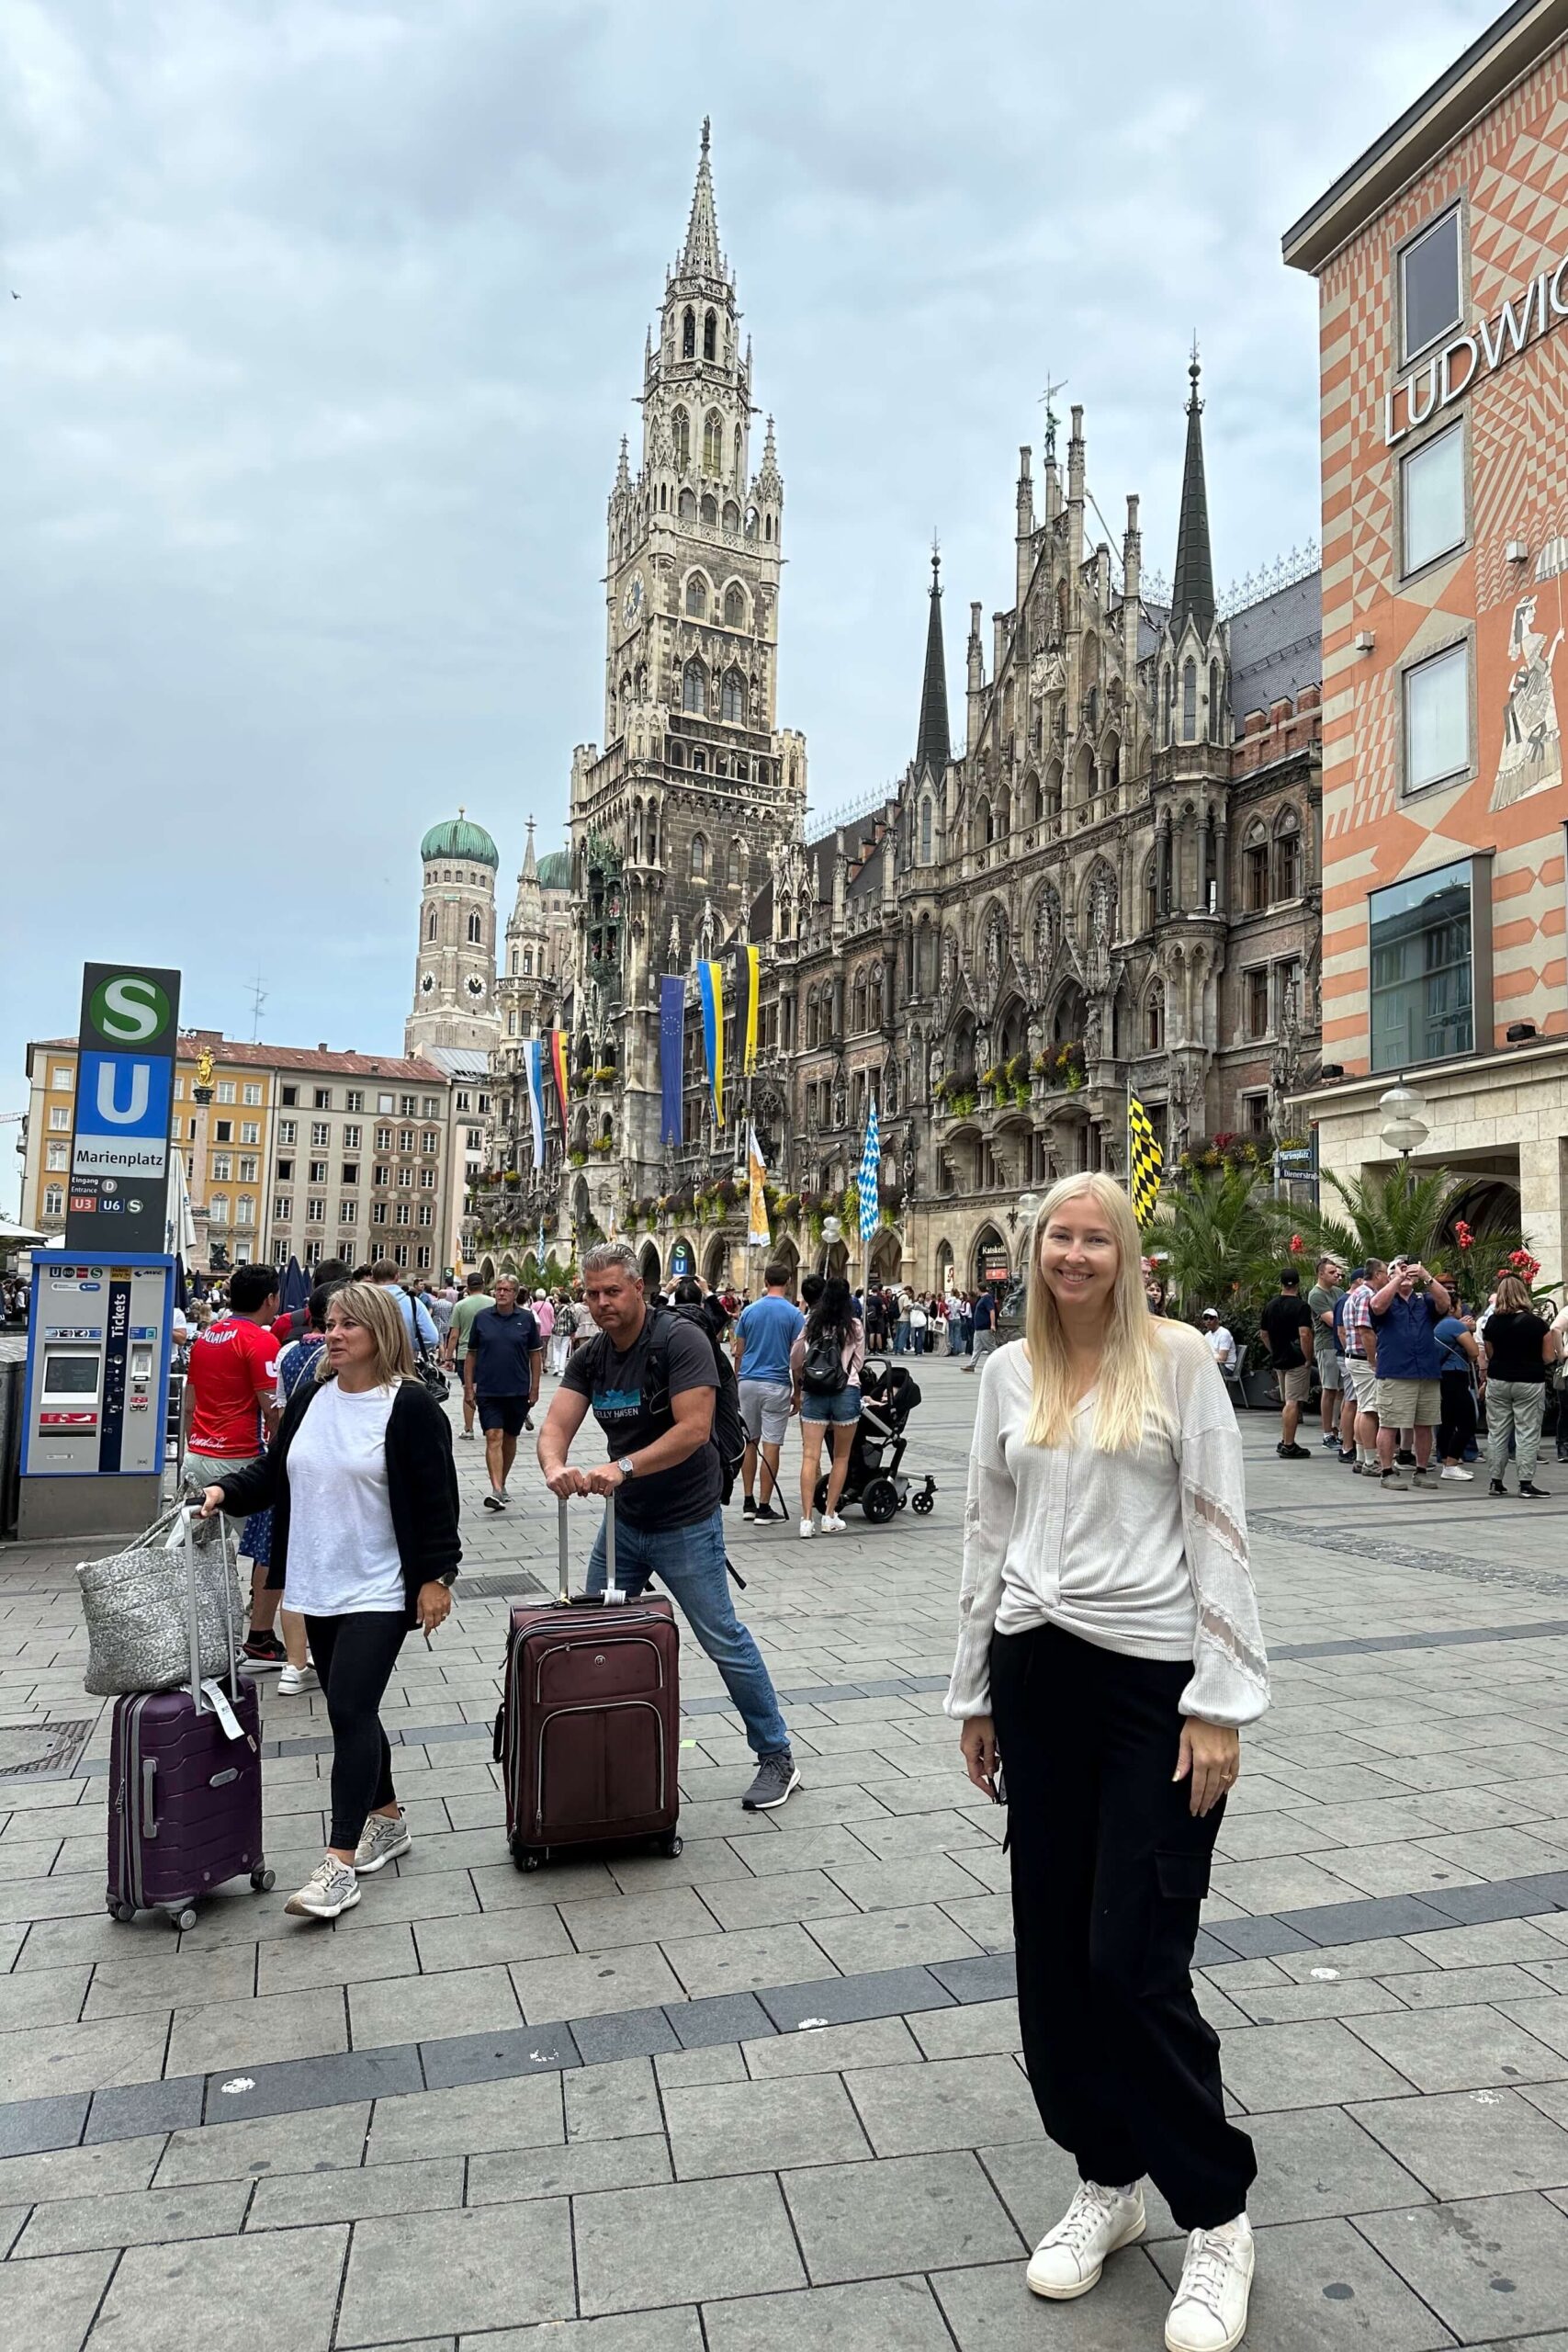 woman in street in Germany, people passing with suitcases and luggage